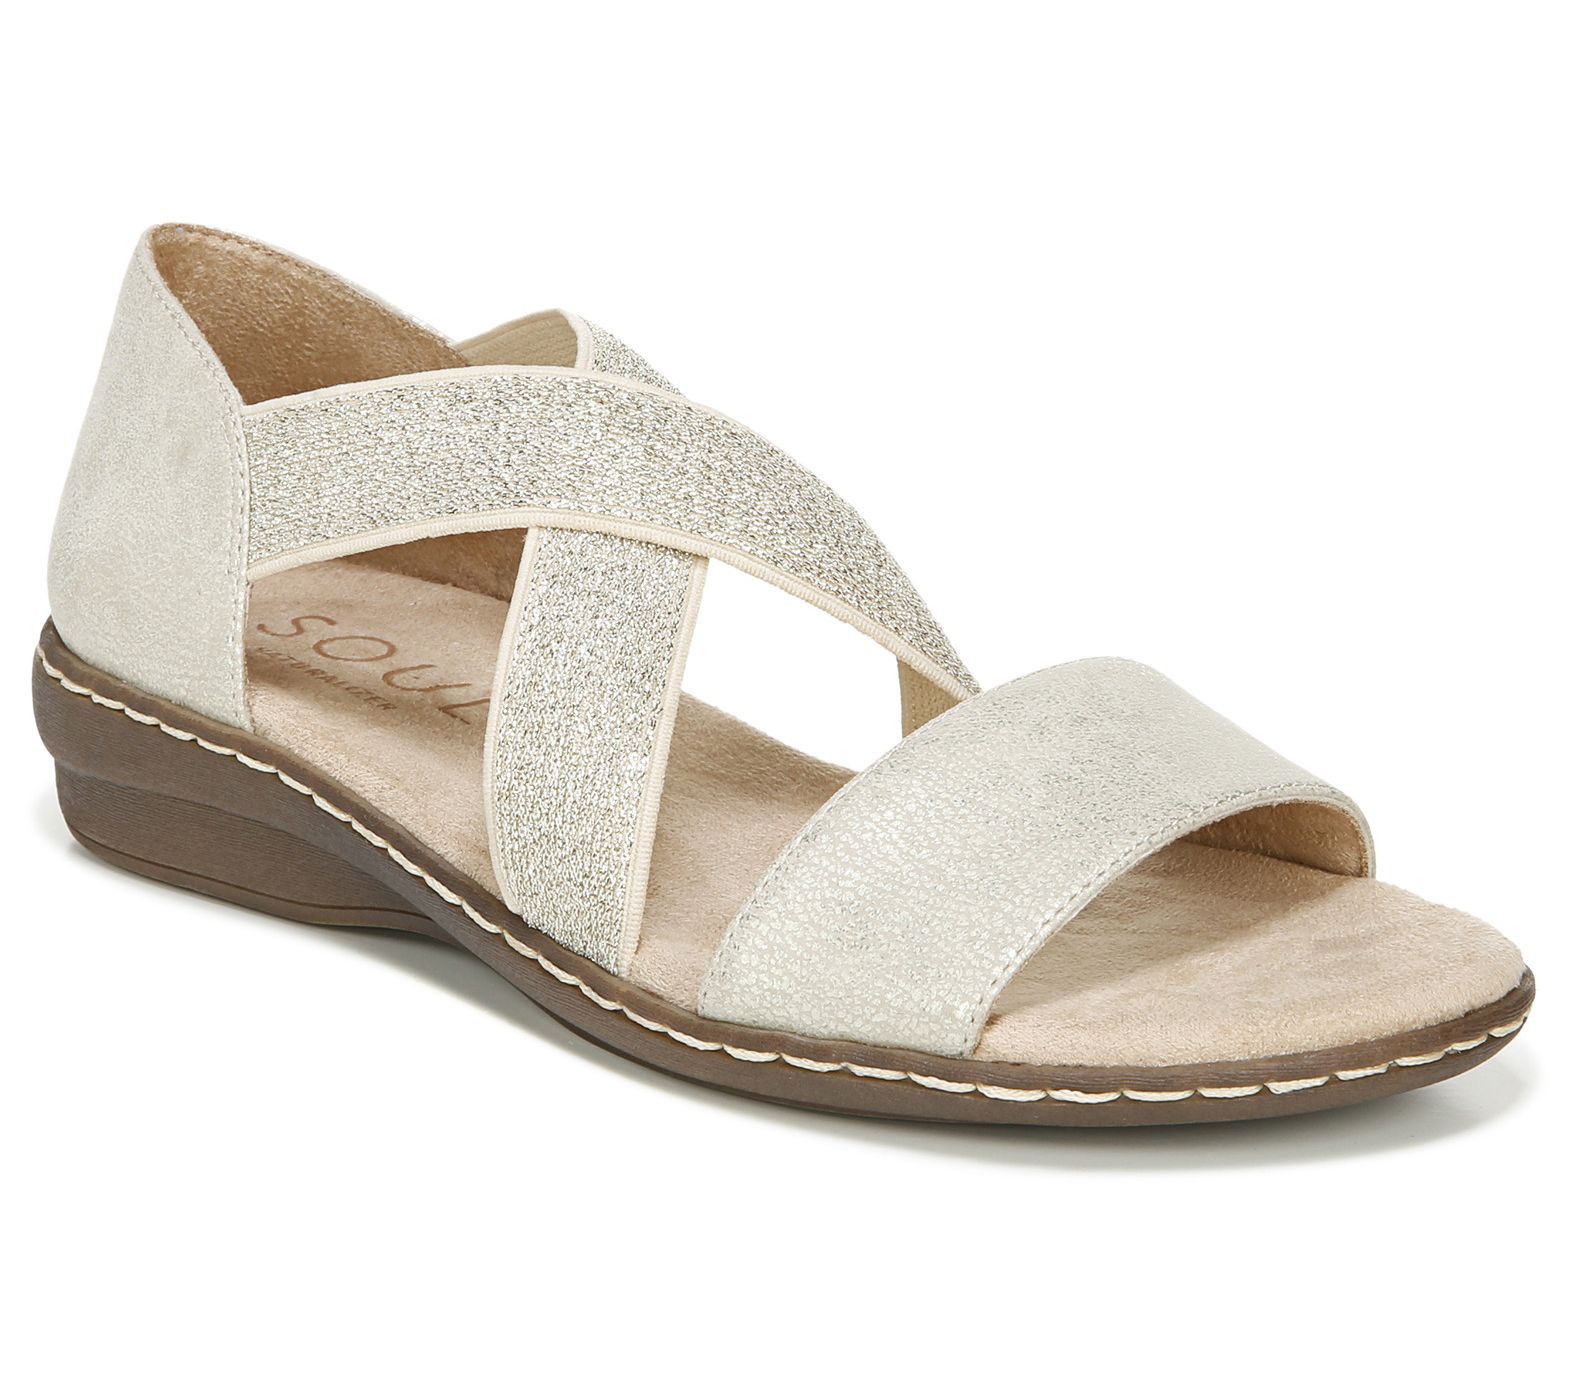 naturalizer fawn slingback sandals